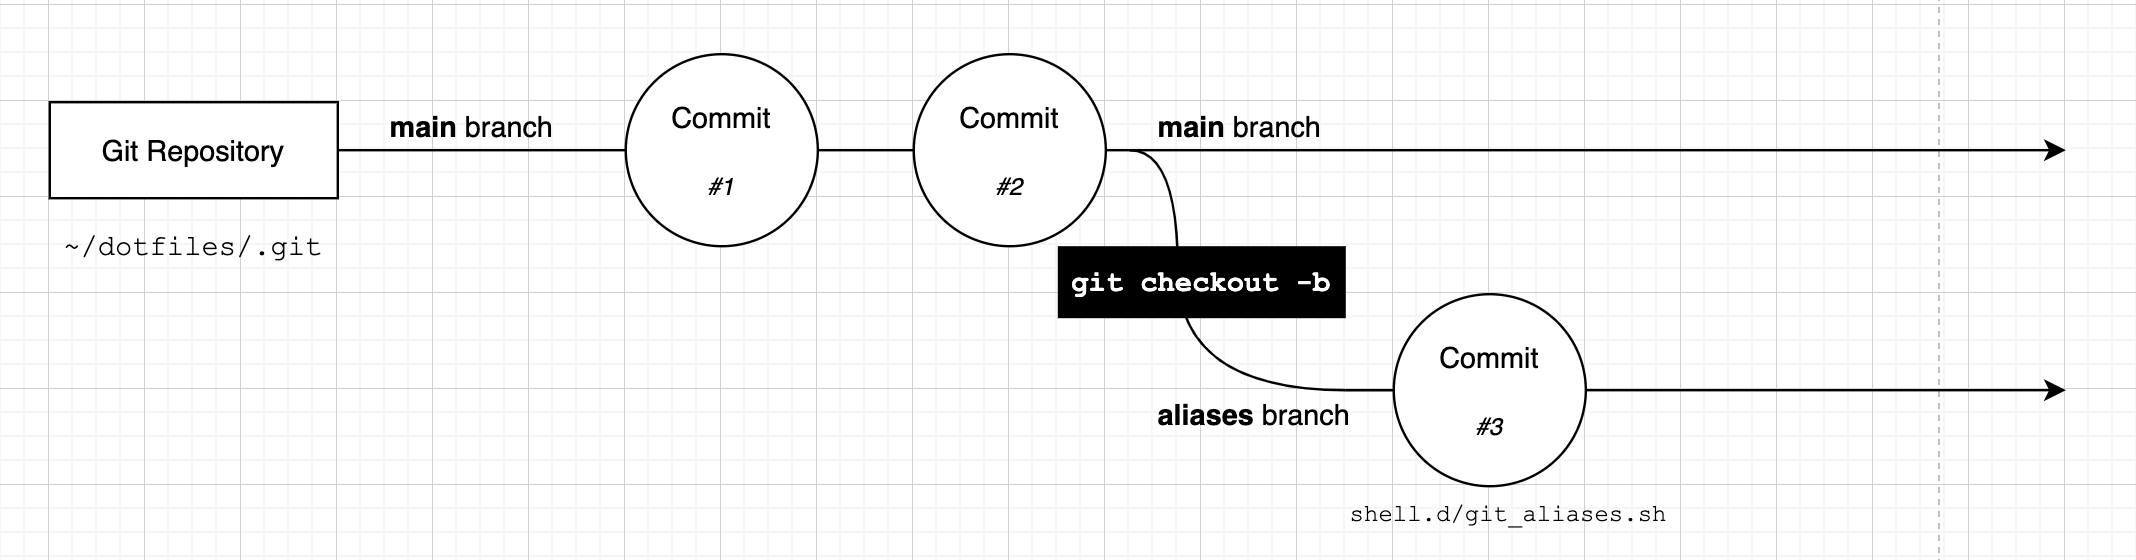 Diagram showing how &#39;git checkout -b&#39; creates a new branch